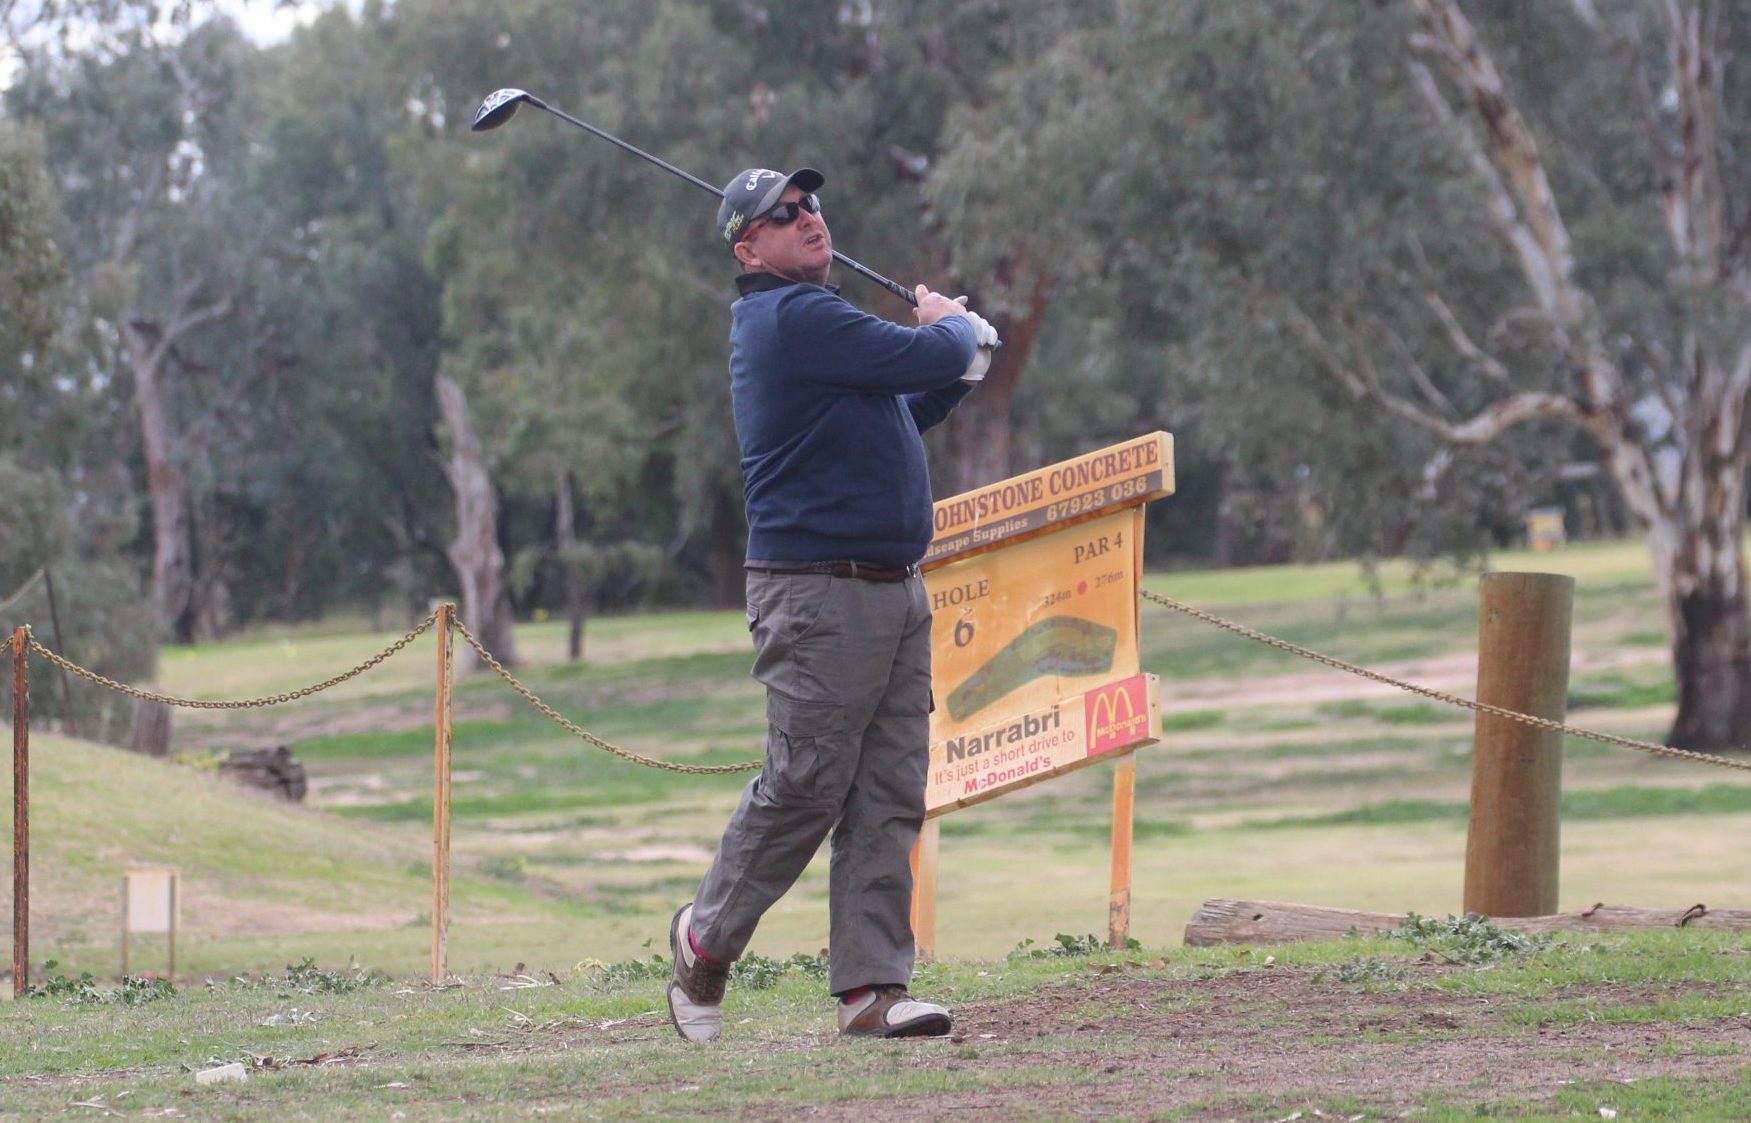 Narrabri Golf Club announces the return of nearest to pins, Sunday golf and knockouts from July